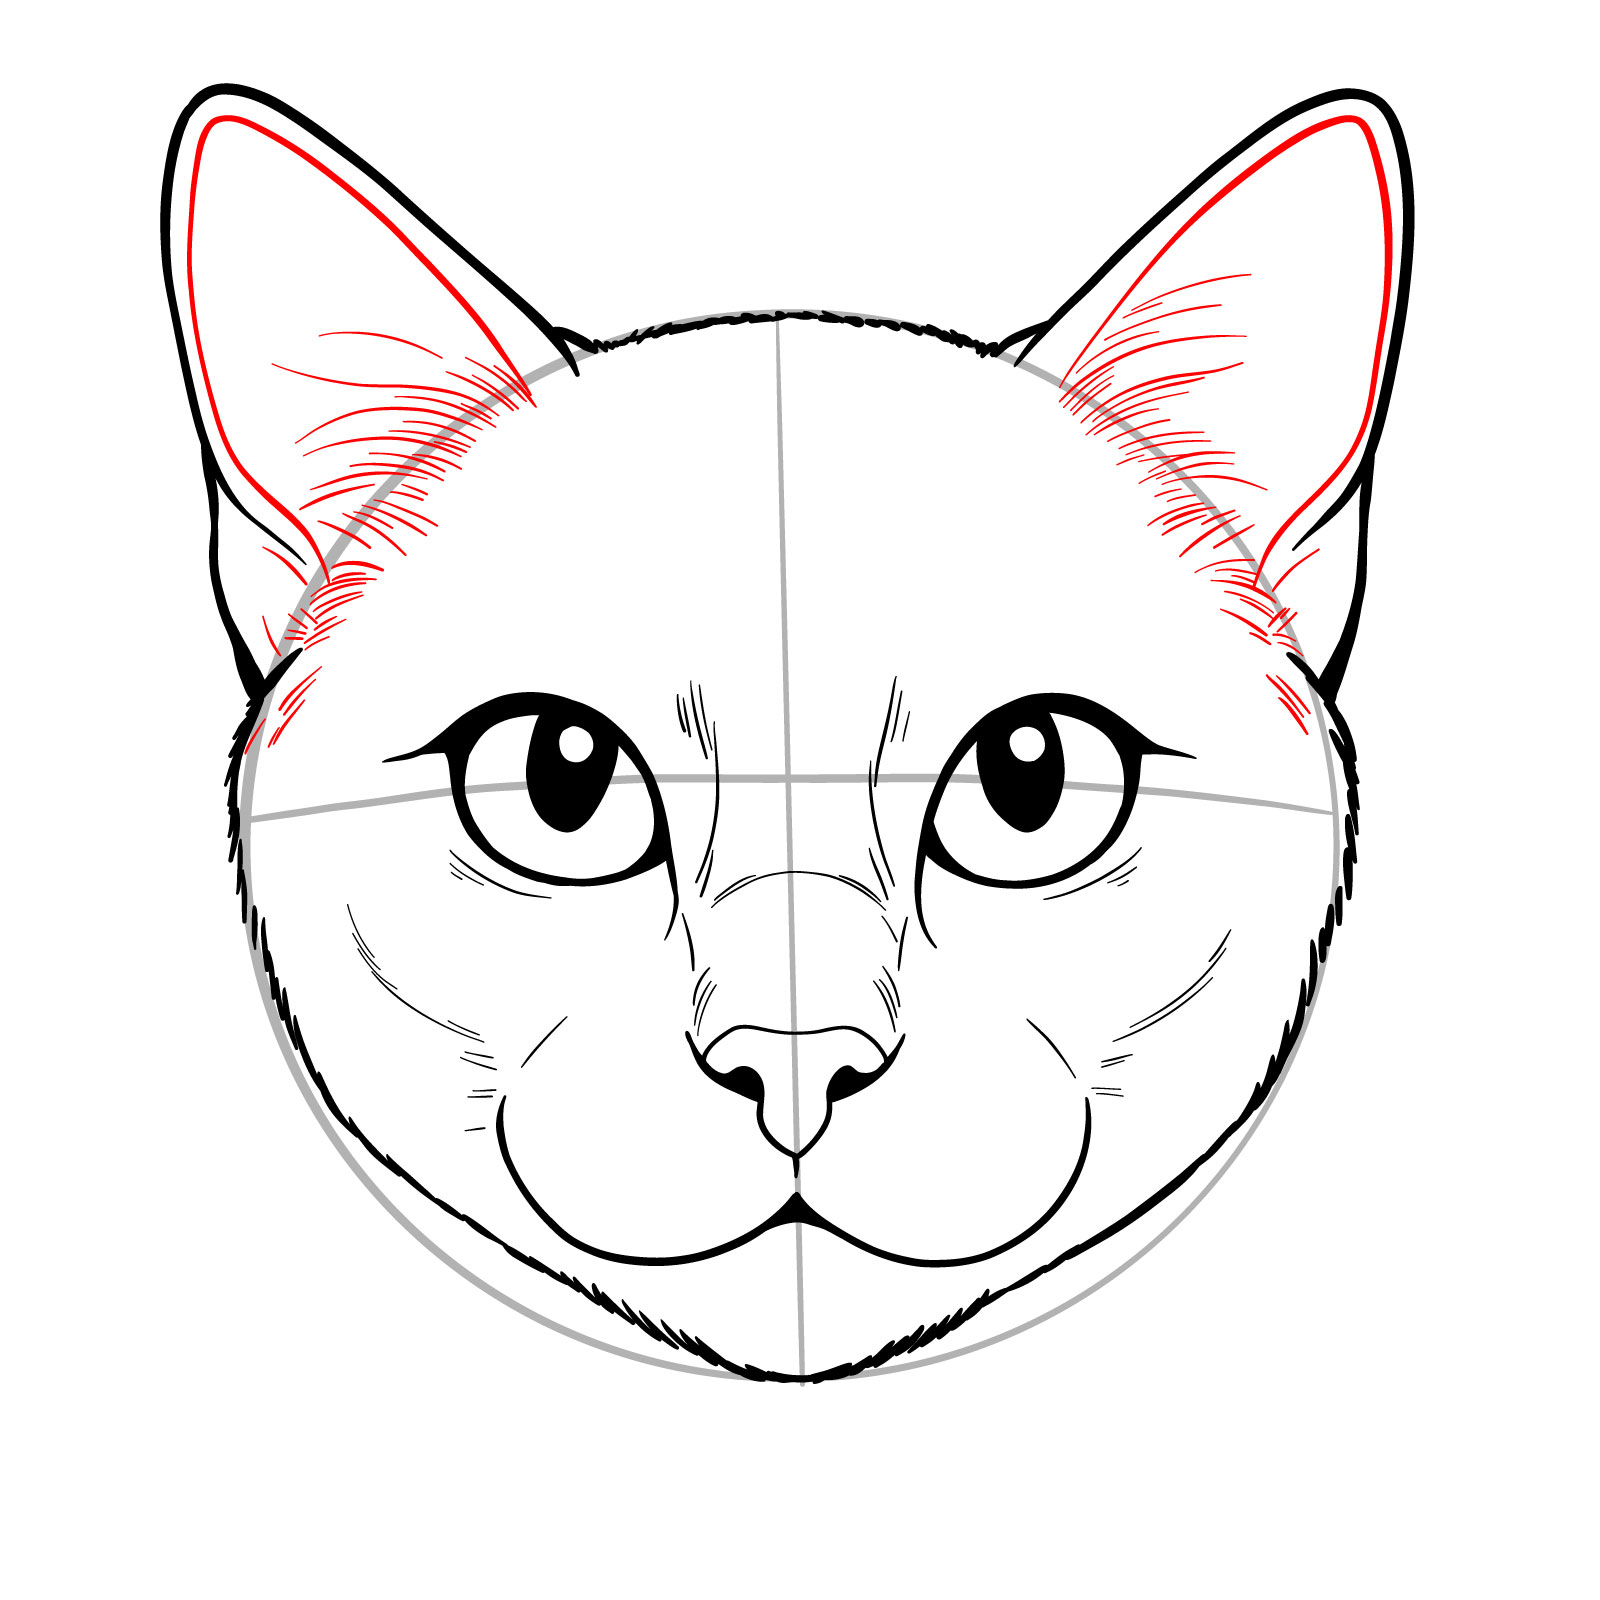 How to Draw a Cartoon Cat Face